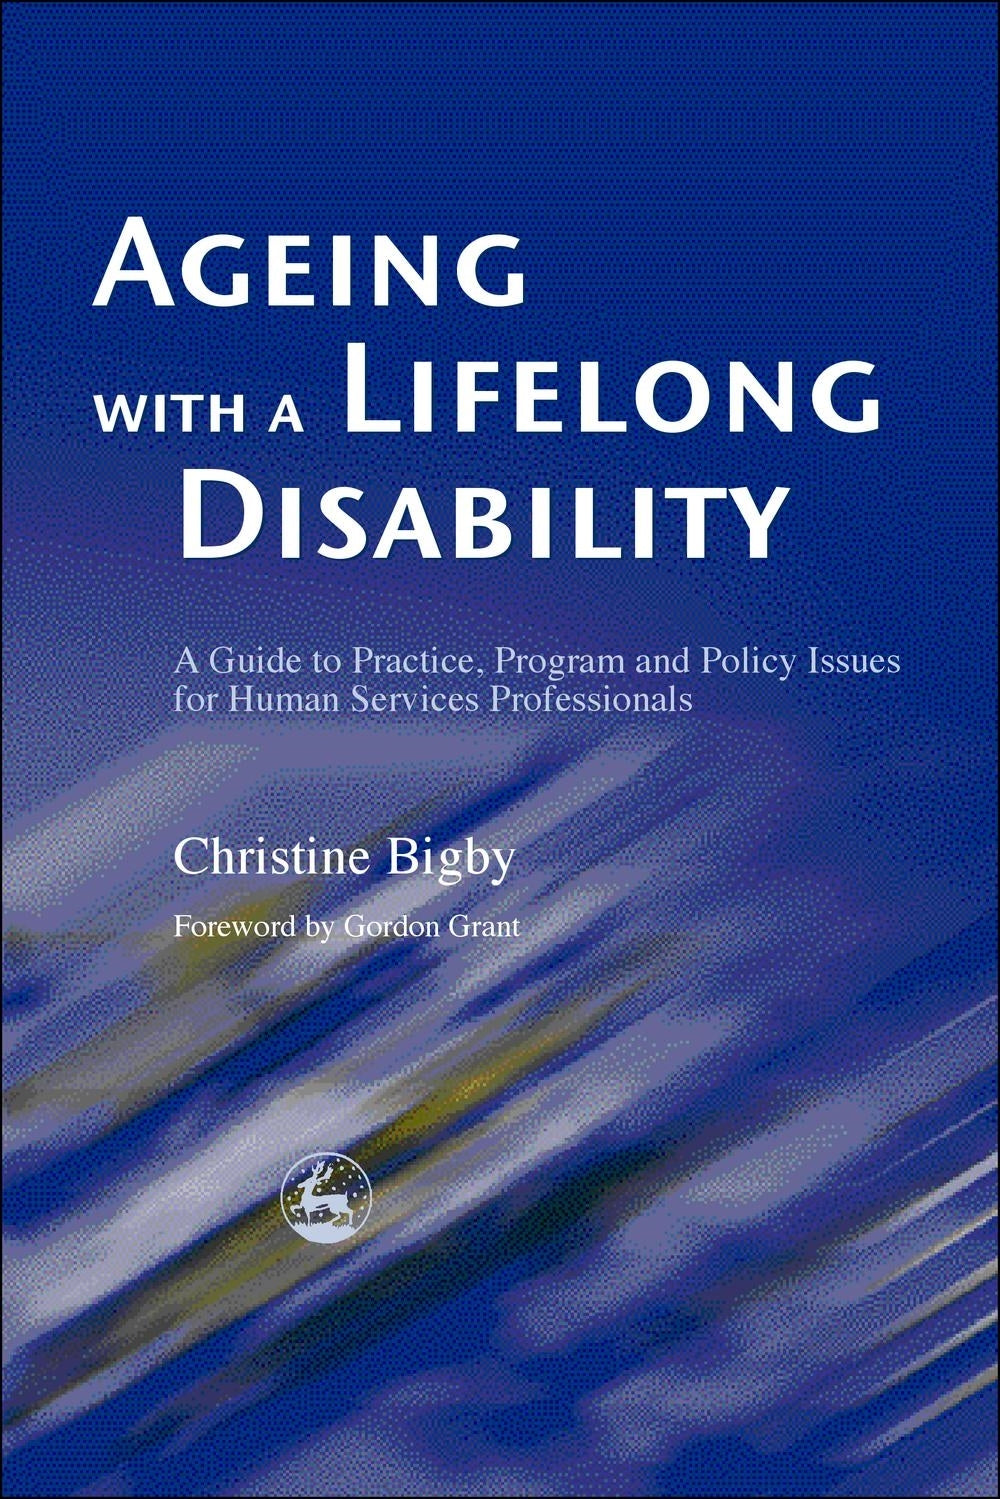 Ageing with a Lifelong Disability by Gordon Grant, Christine Bigby